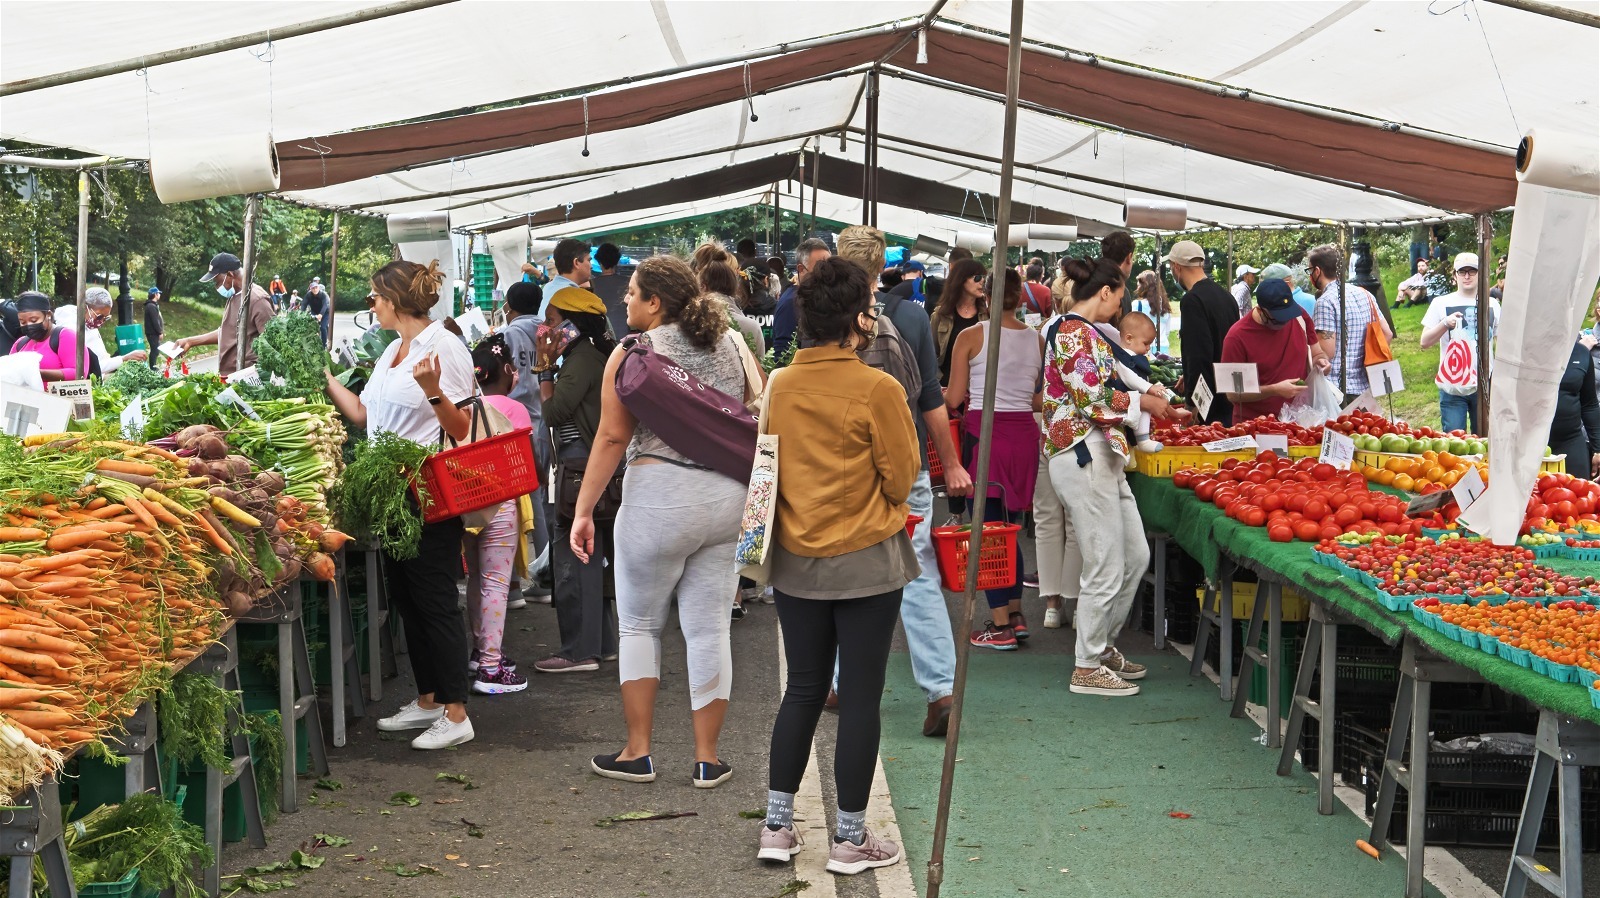 10 Crucial Tips for Shopping at Farmers Markets